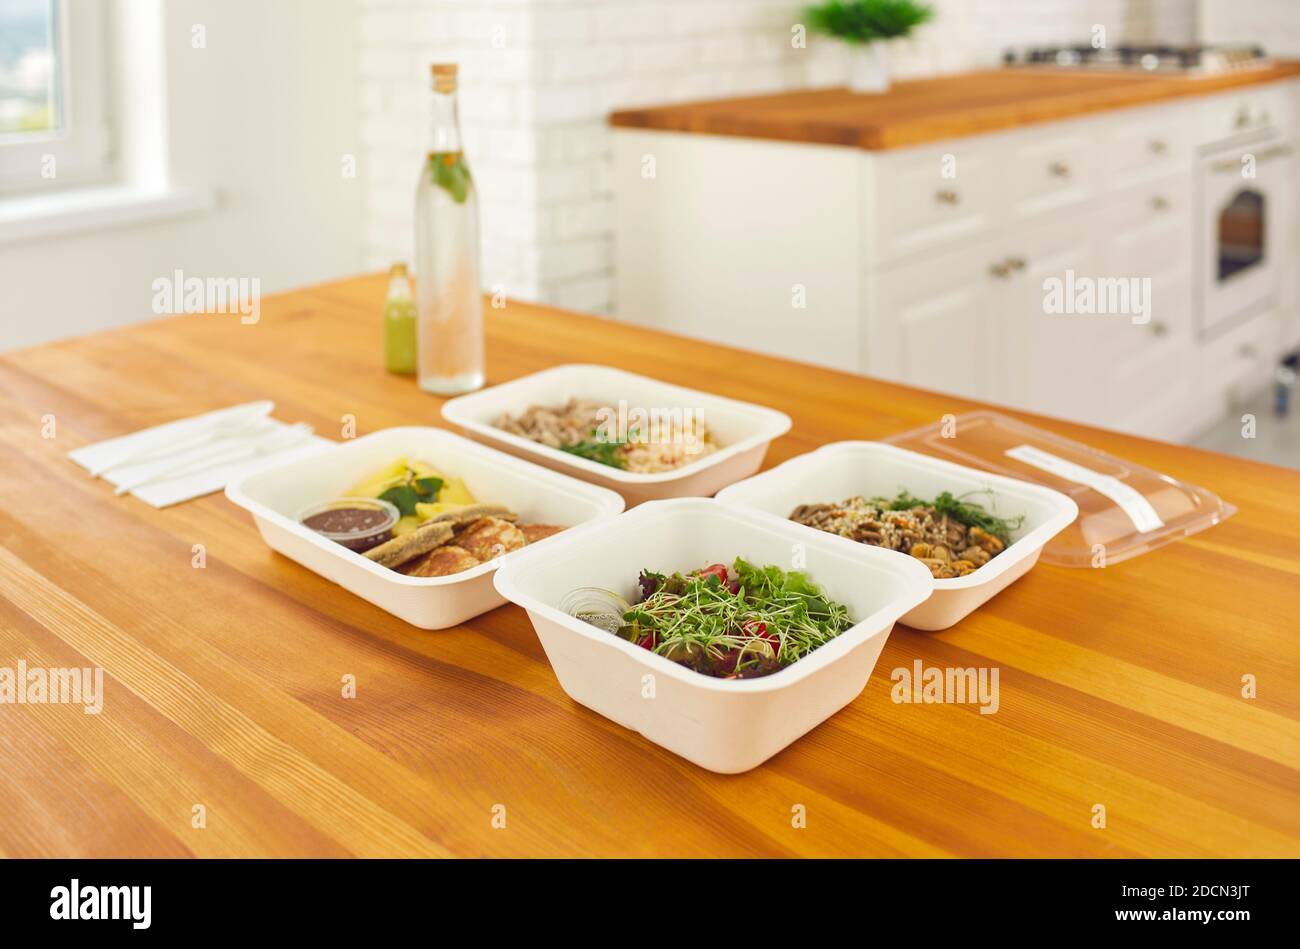 On the table four containers with ready a variety of healthy food ordered in the delivery service. Stock Photo